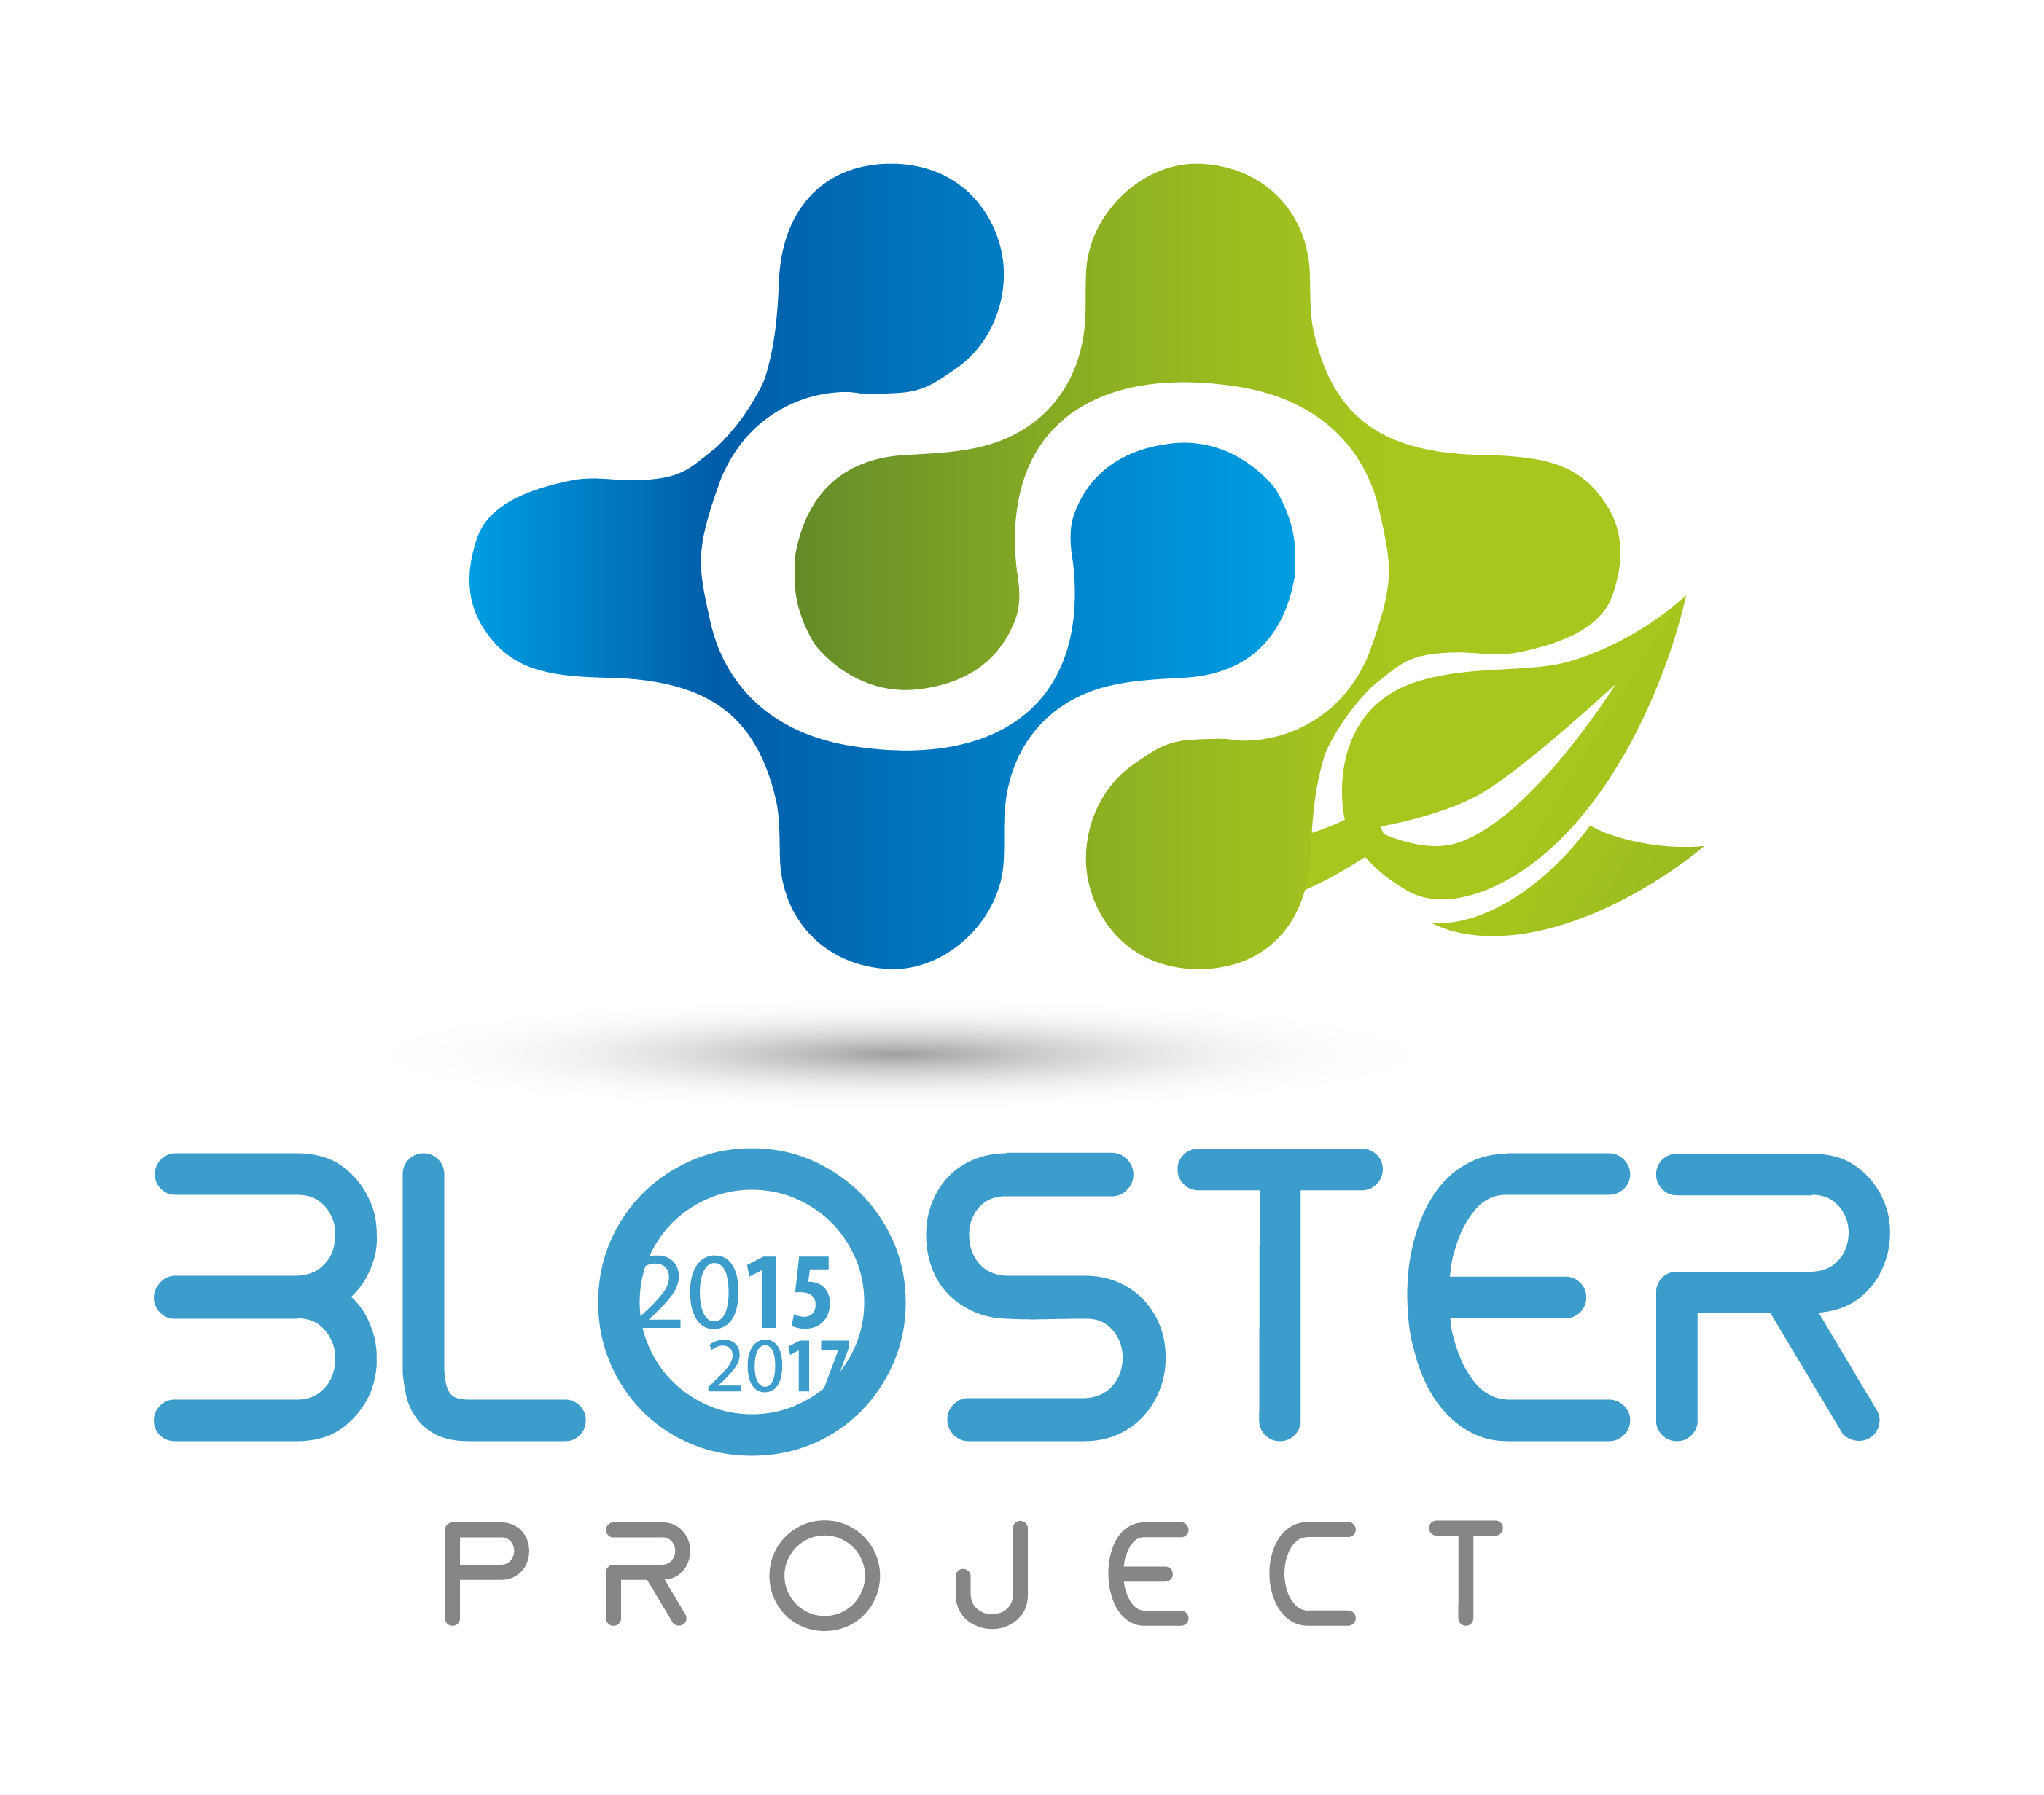 BLOSTER PROJECT